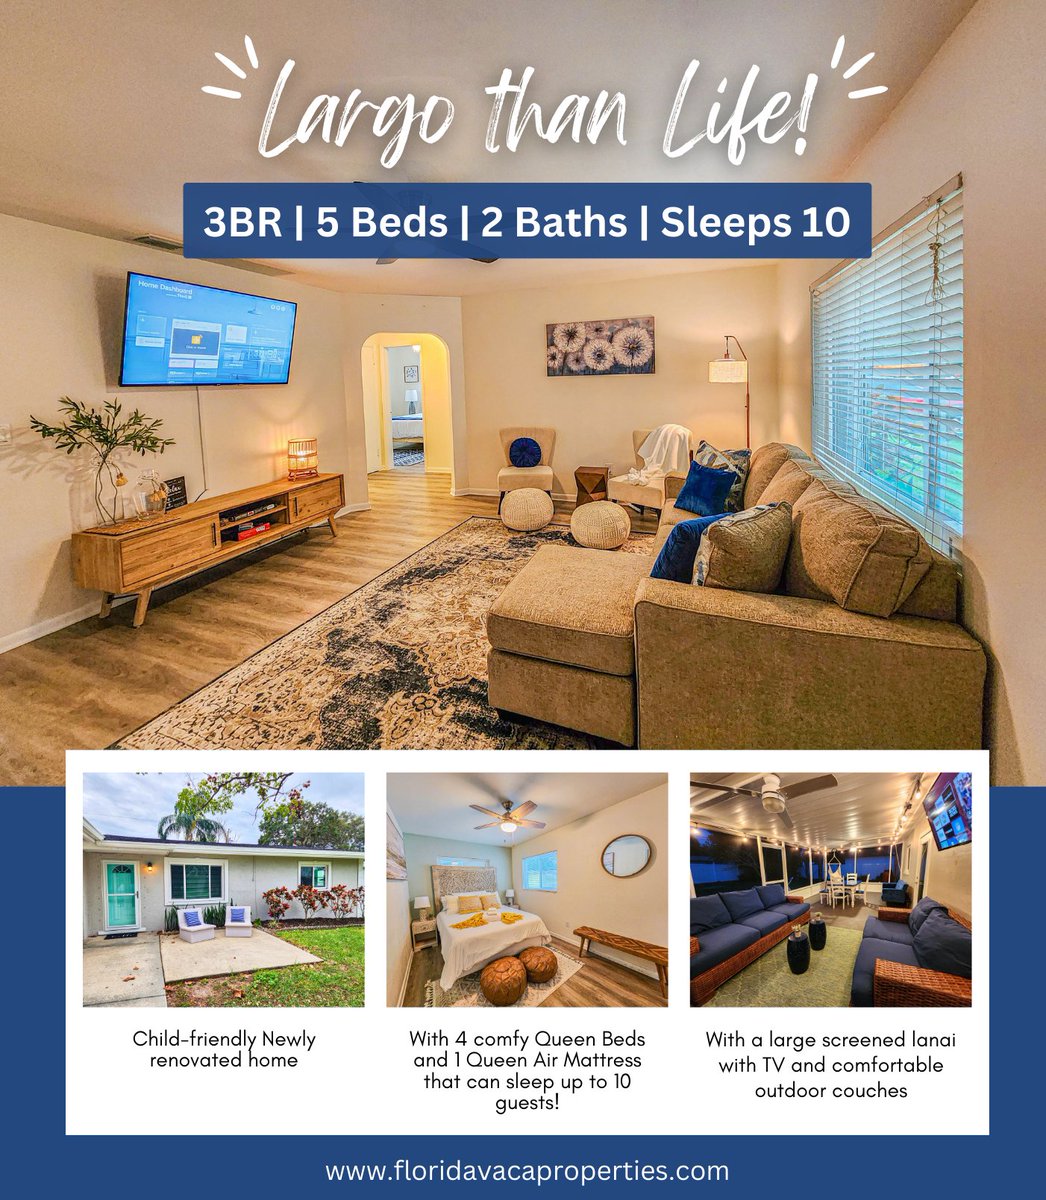 SPECIAL MAY PRICE ‼ 
(Check out our calendar on the link)

👉Book direct to save: bit.ly/3nE502f

#Largo #FloridaVacation #largolife #booknow #weekendvibes #florida #vacation #booknowtravellater #familyvacation #shorttermrentals